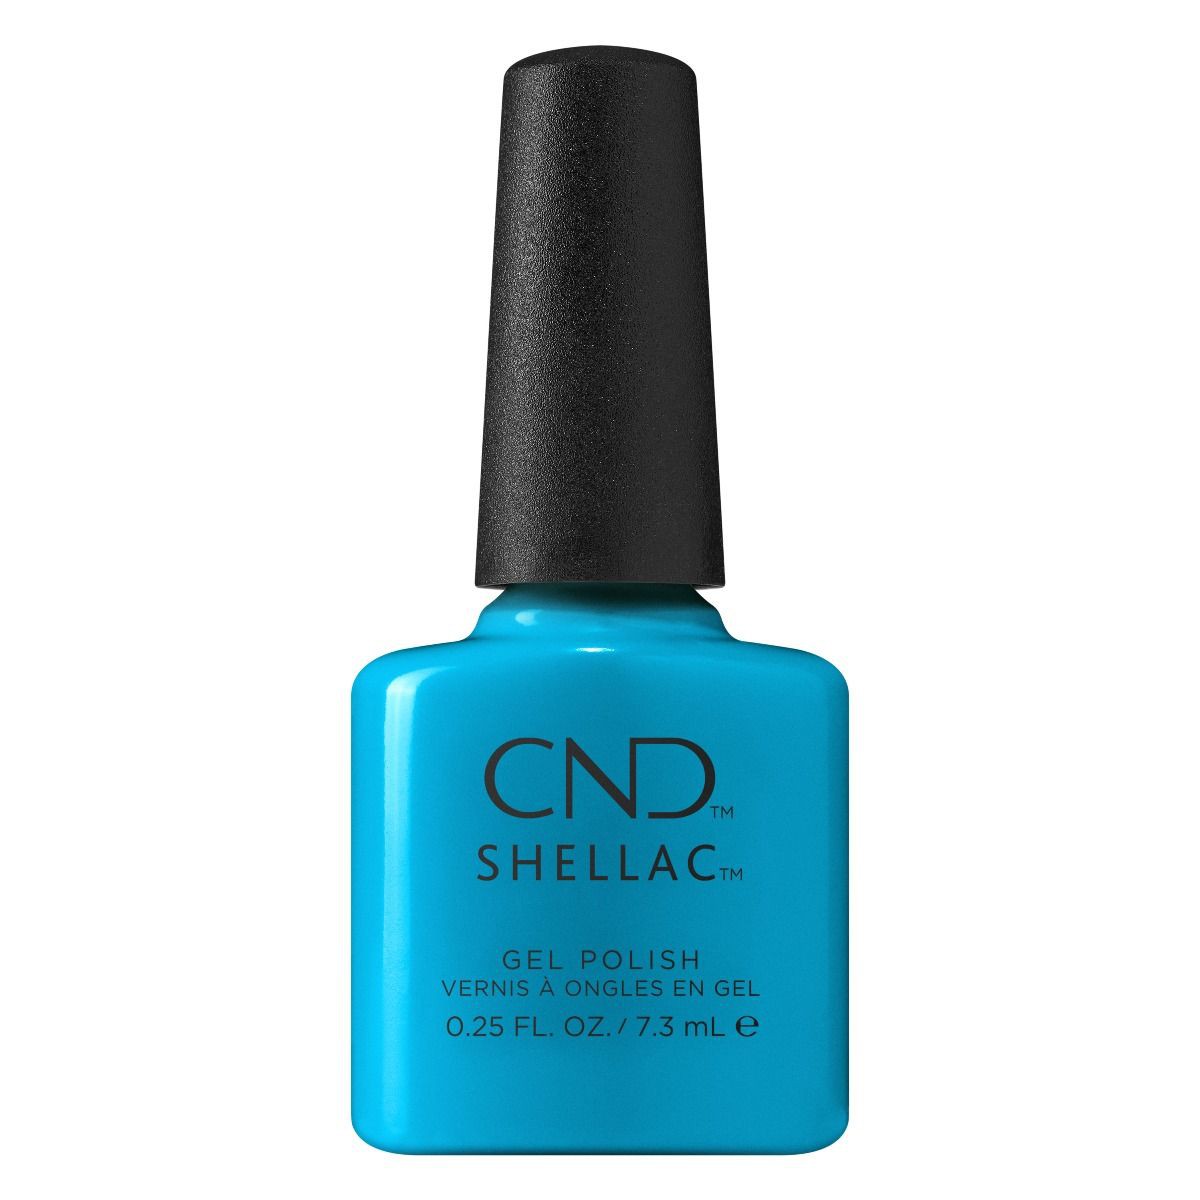 220. Pop-up pool party|SHELLAC 7.3 ML